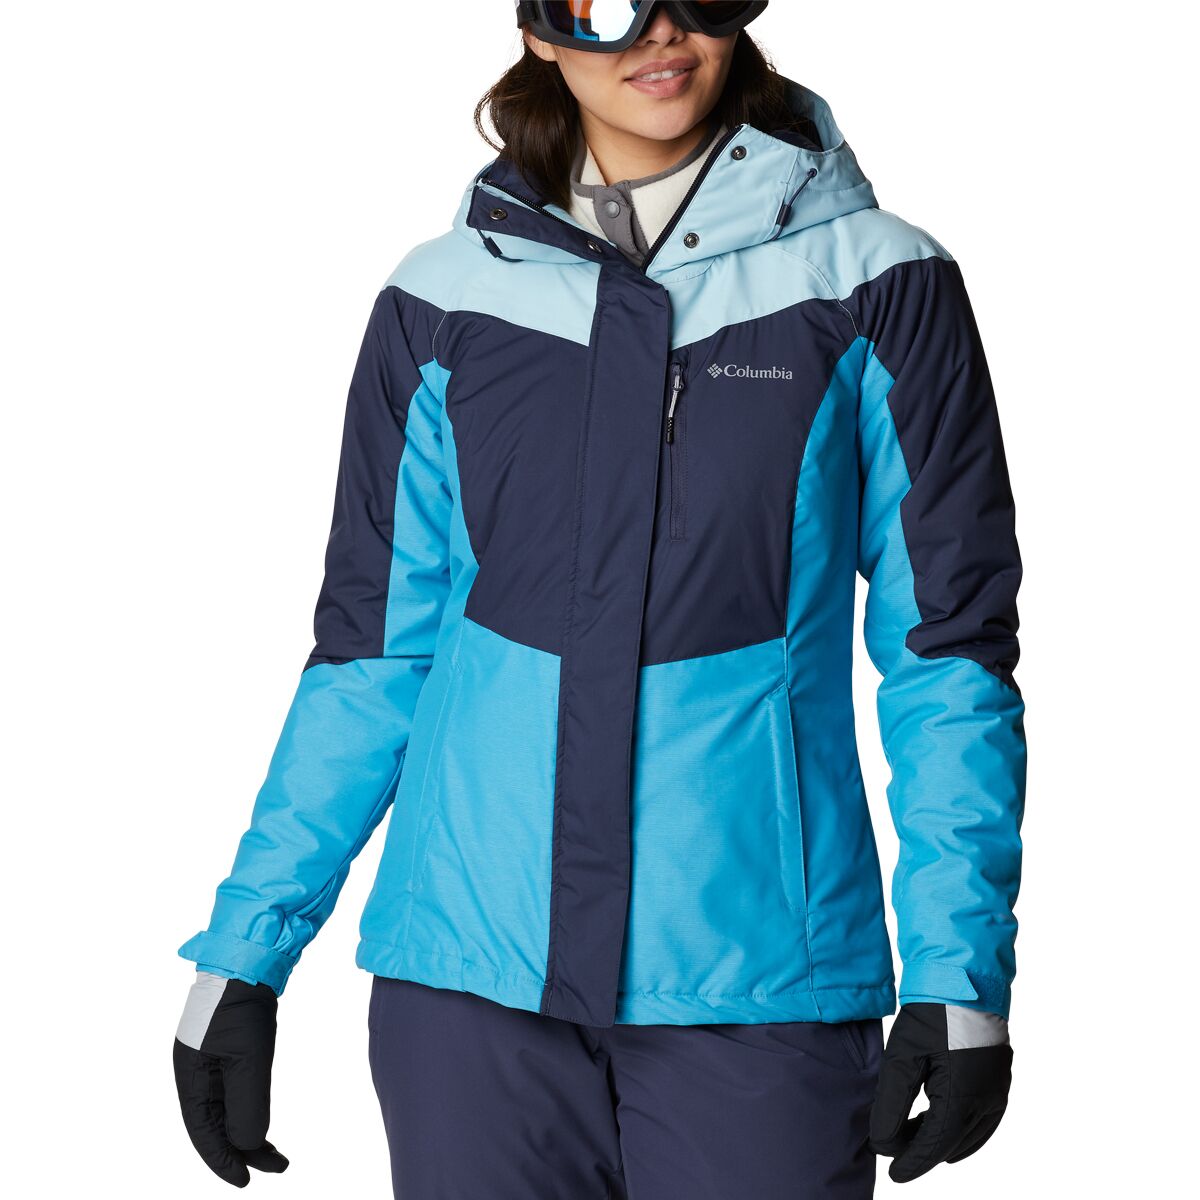 Columbia Rosie Run Insulated Jacket - Women's Nocturnal/Spring Blue Hthr/Blue Chill